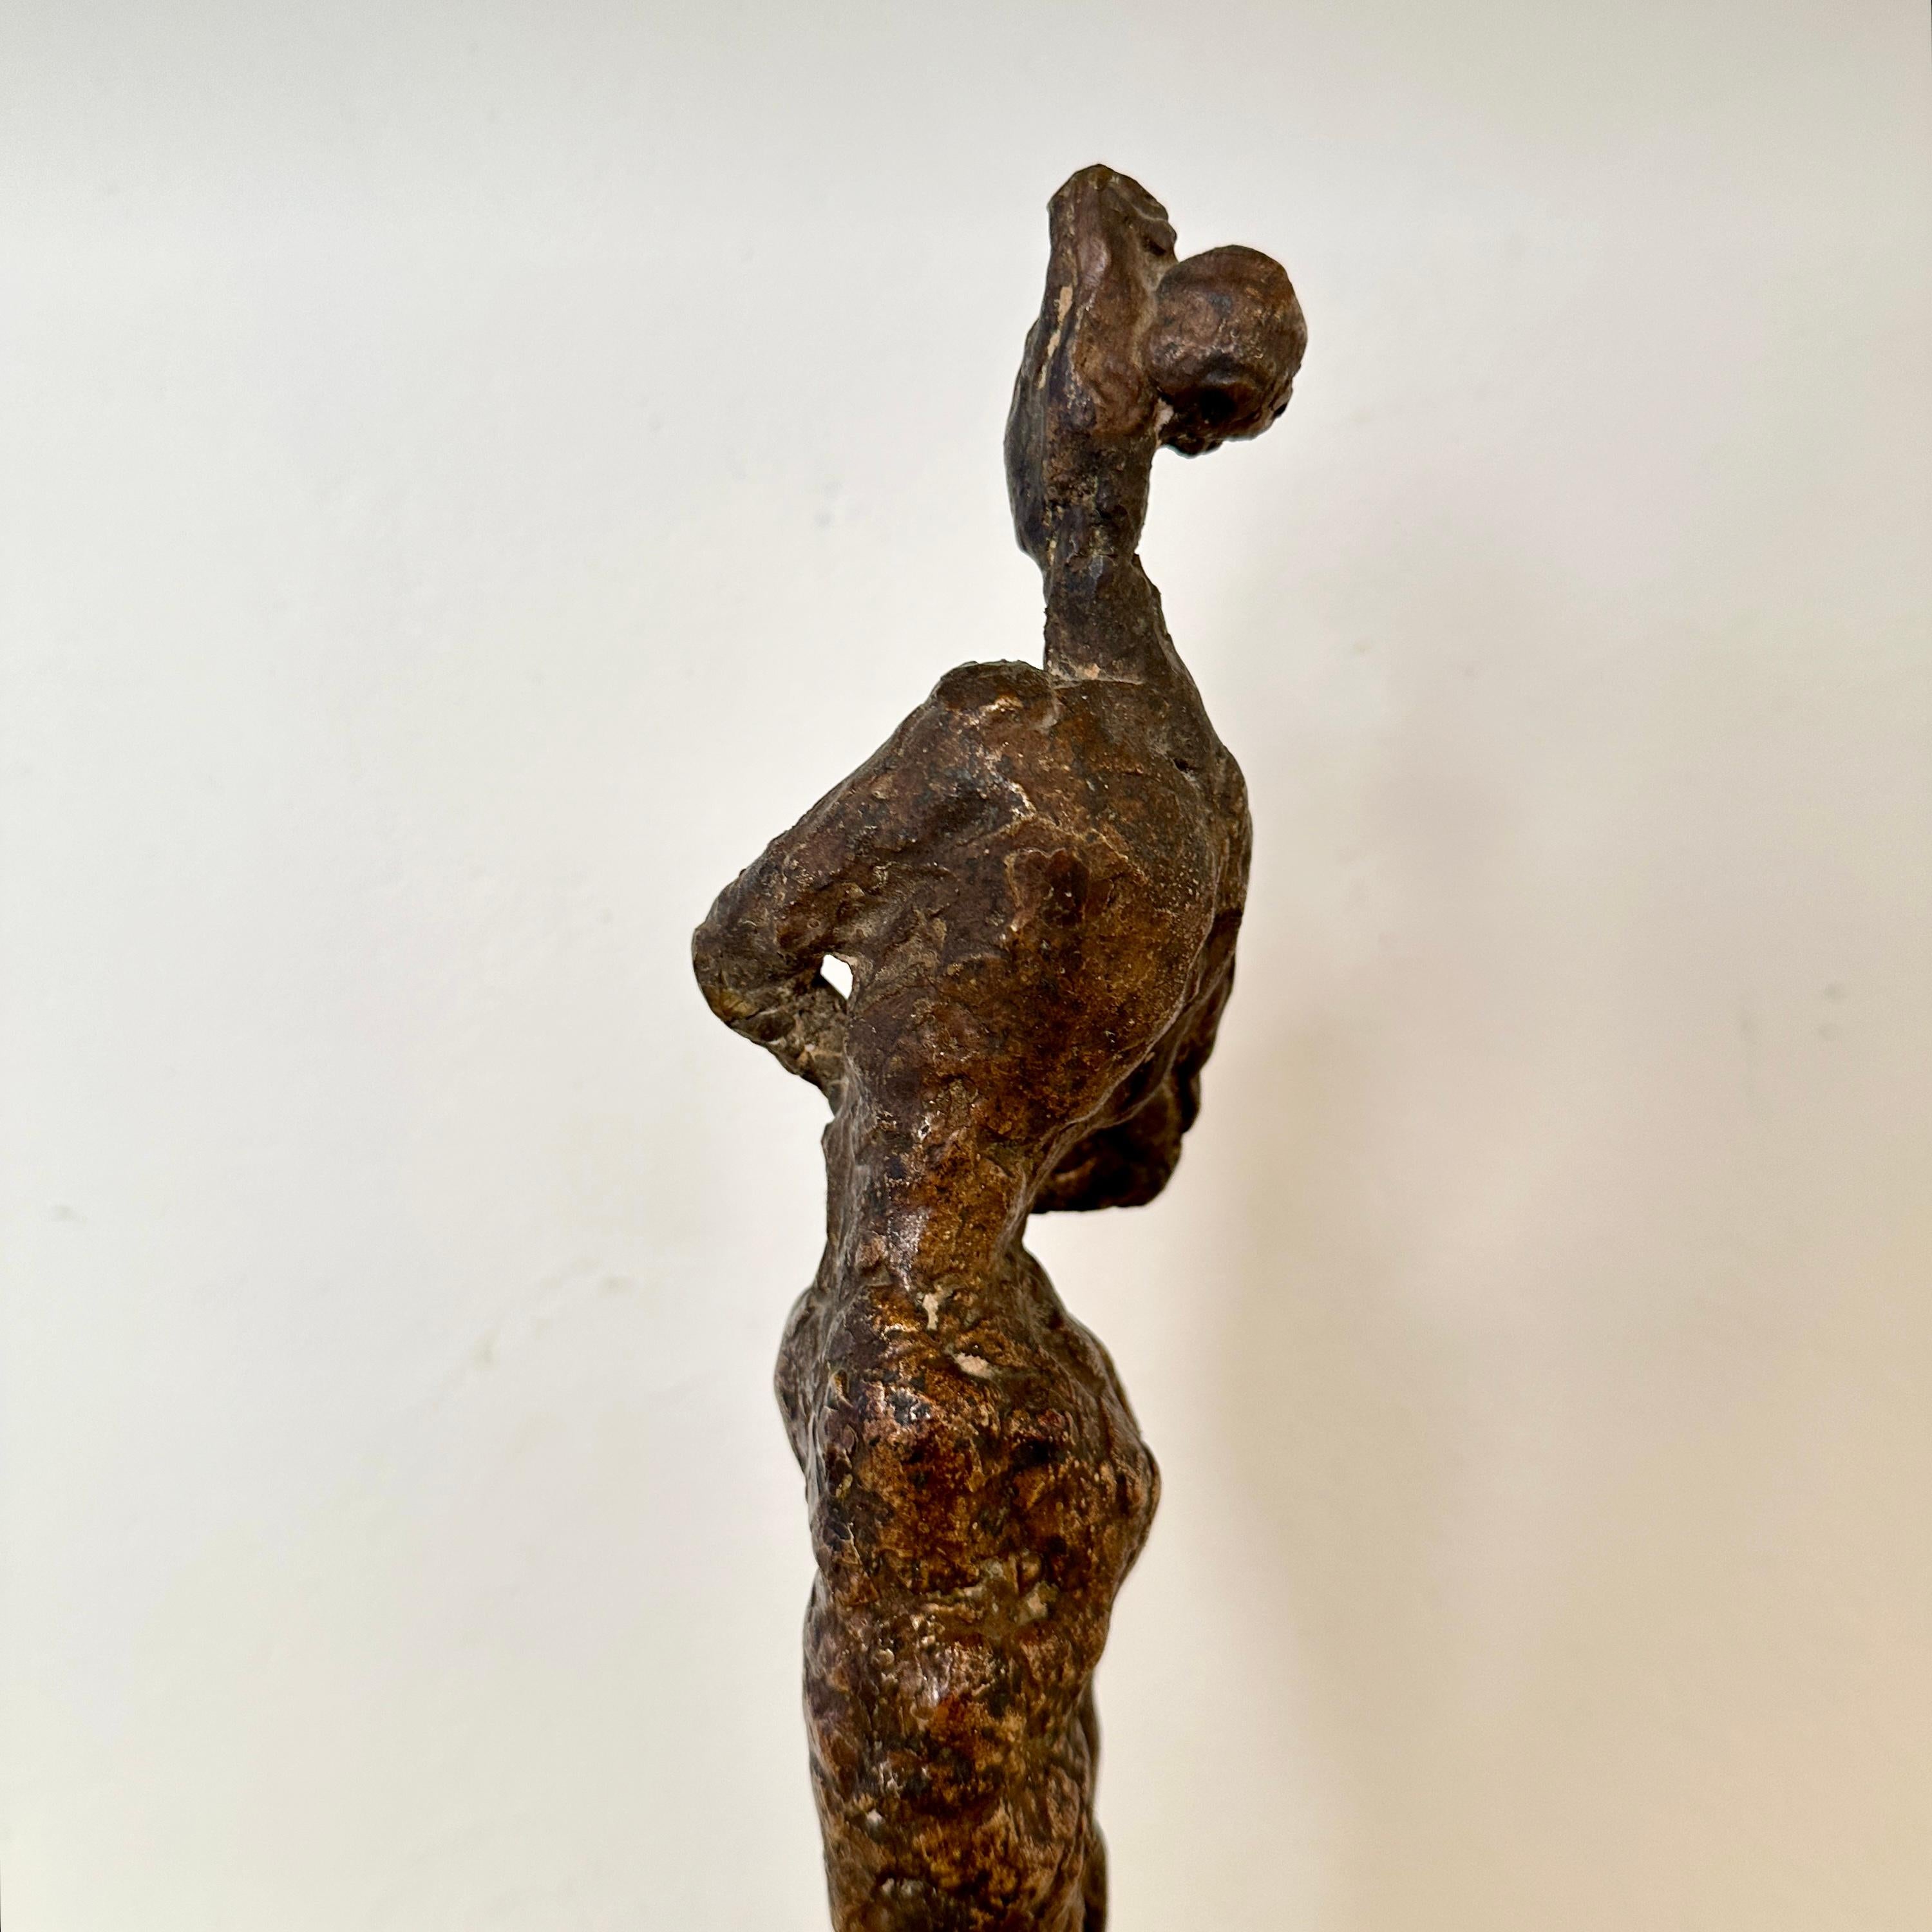 Small Cast Bronze Woman Sculpture by Oskar Bottoli on a Black Marble Stand, 1969 For Sale 3